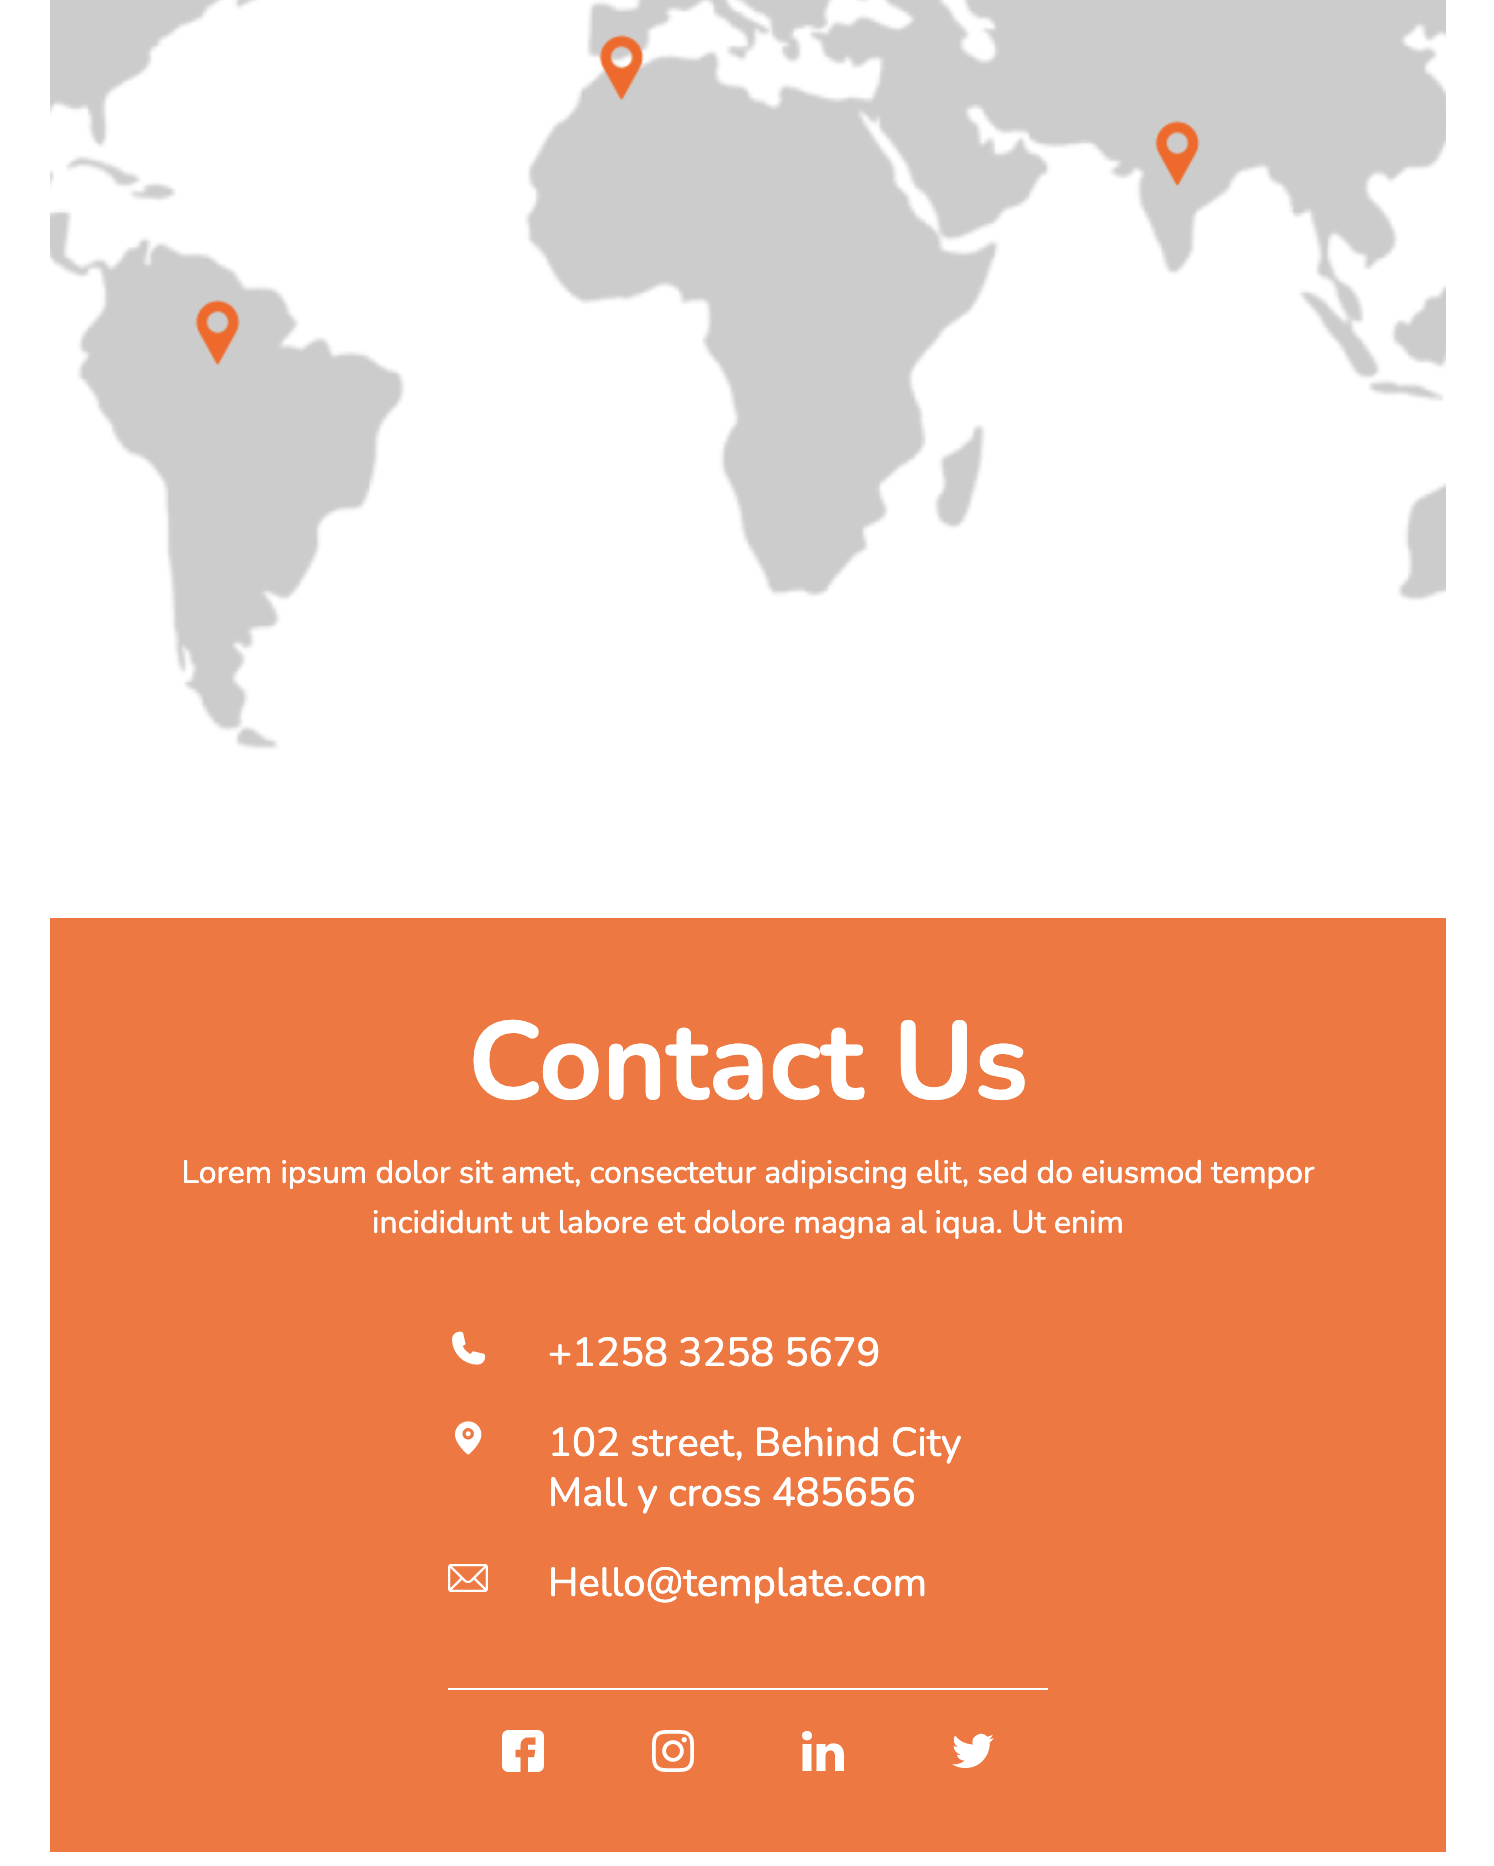 Contact designs for websites: Contact Page With World Map Tablet